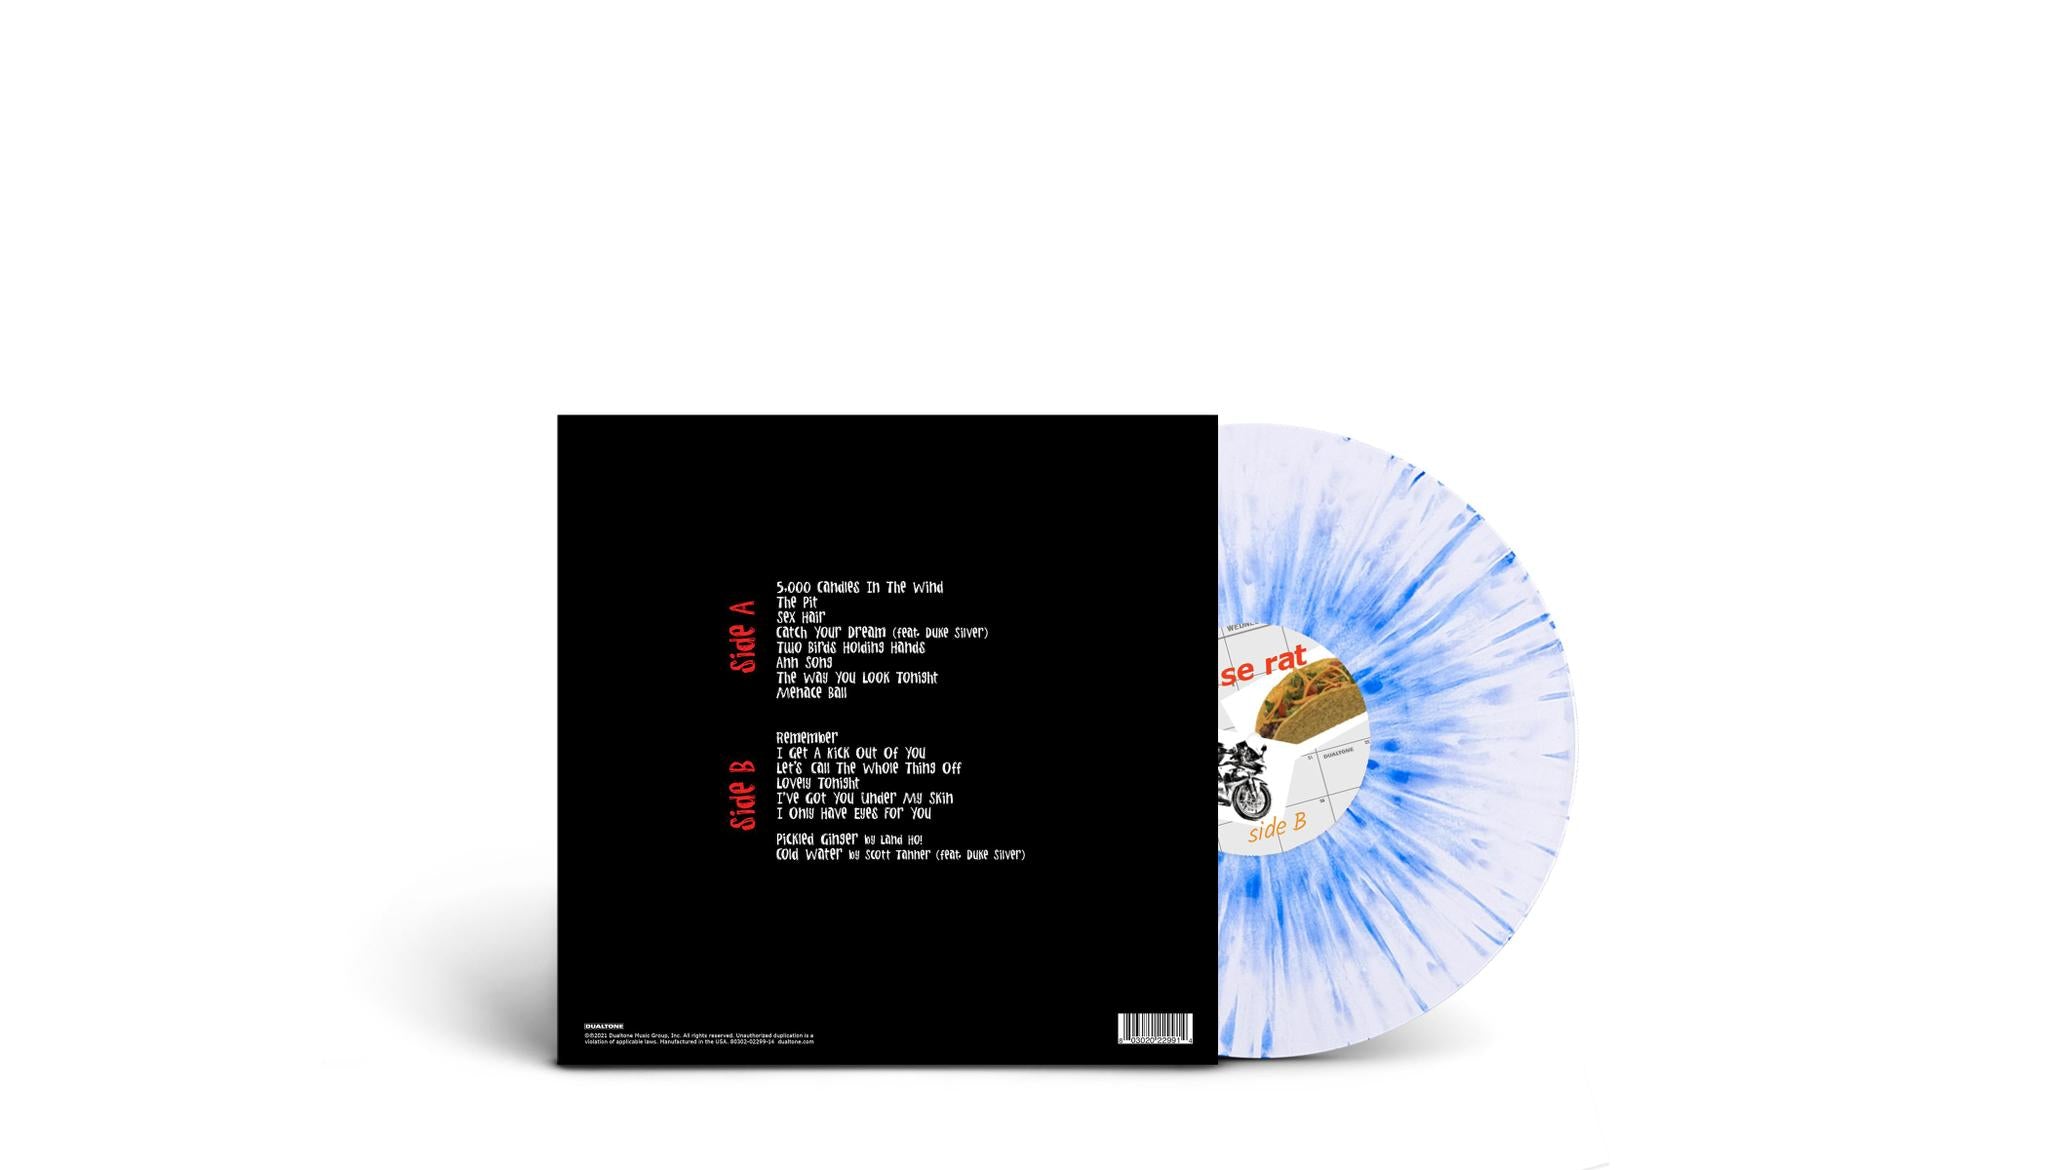 Mouse Rat: The Awesome Album Vinyl: Ice Town Blue Edition